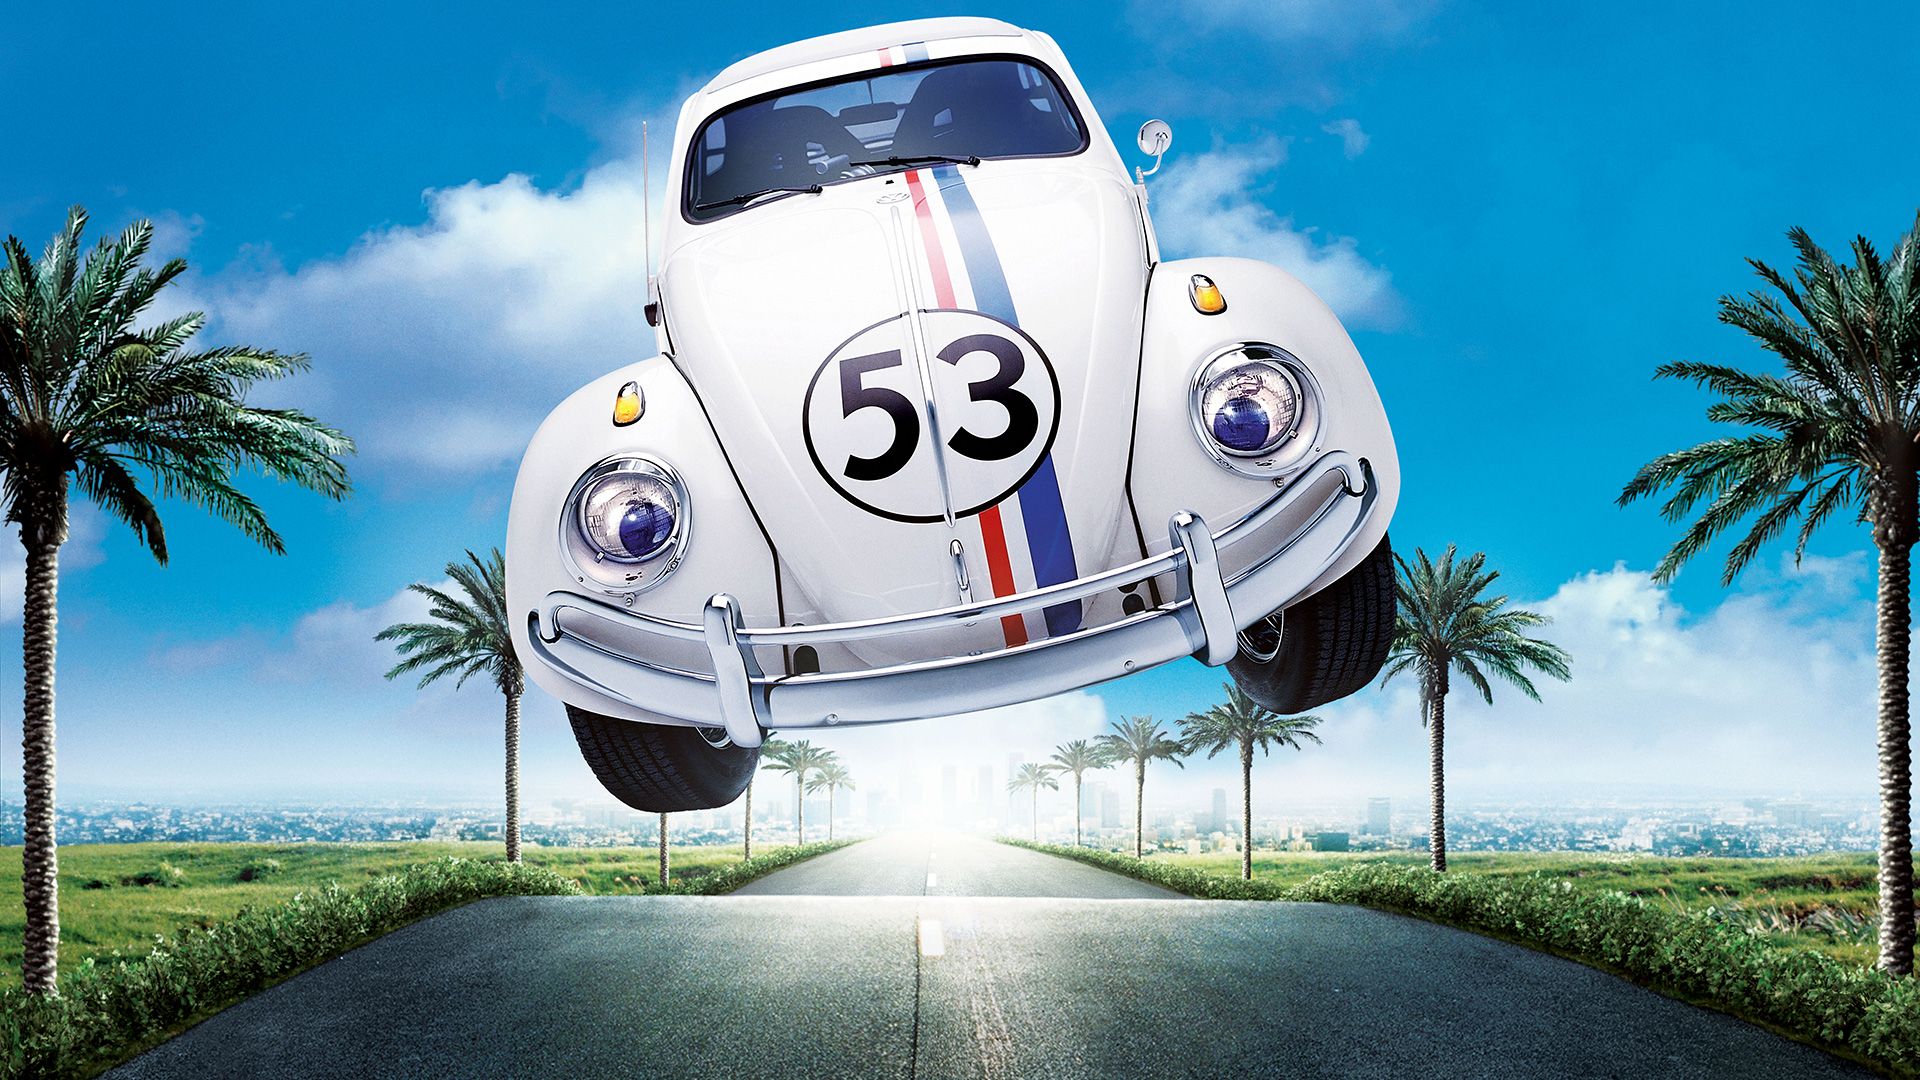 Herbie Fully Loaded background